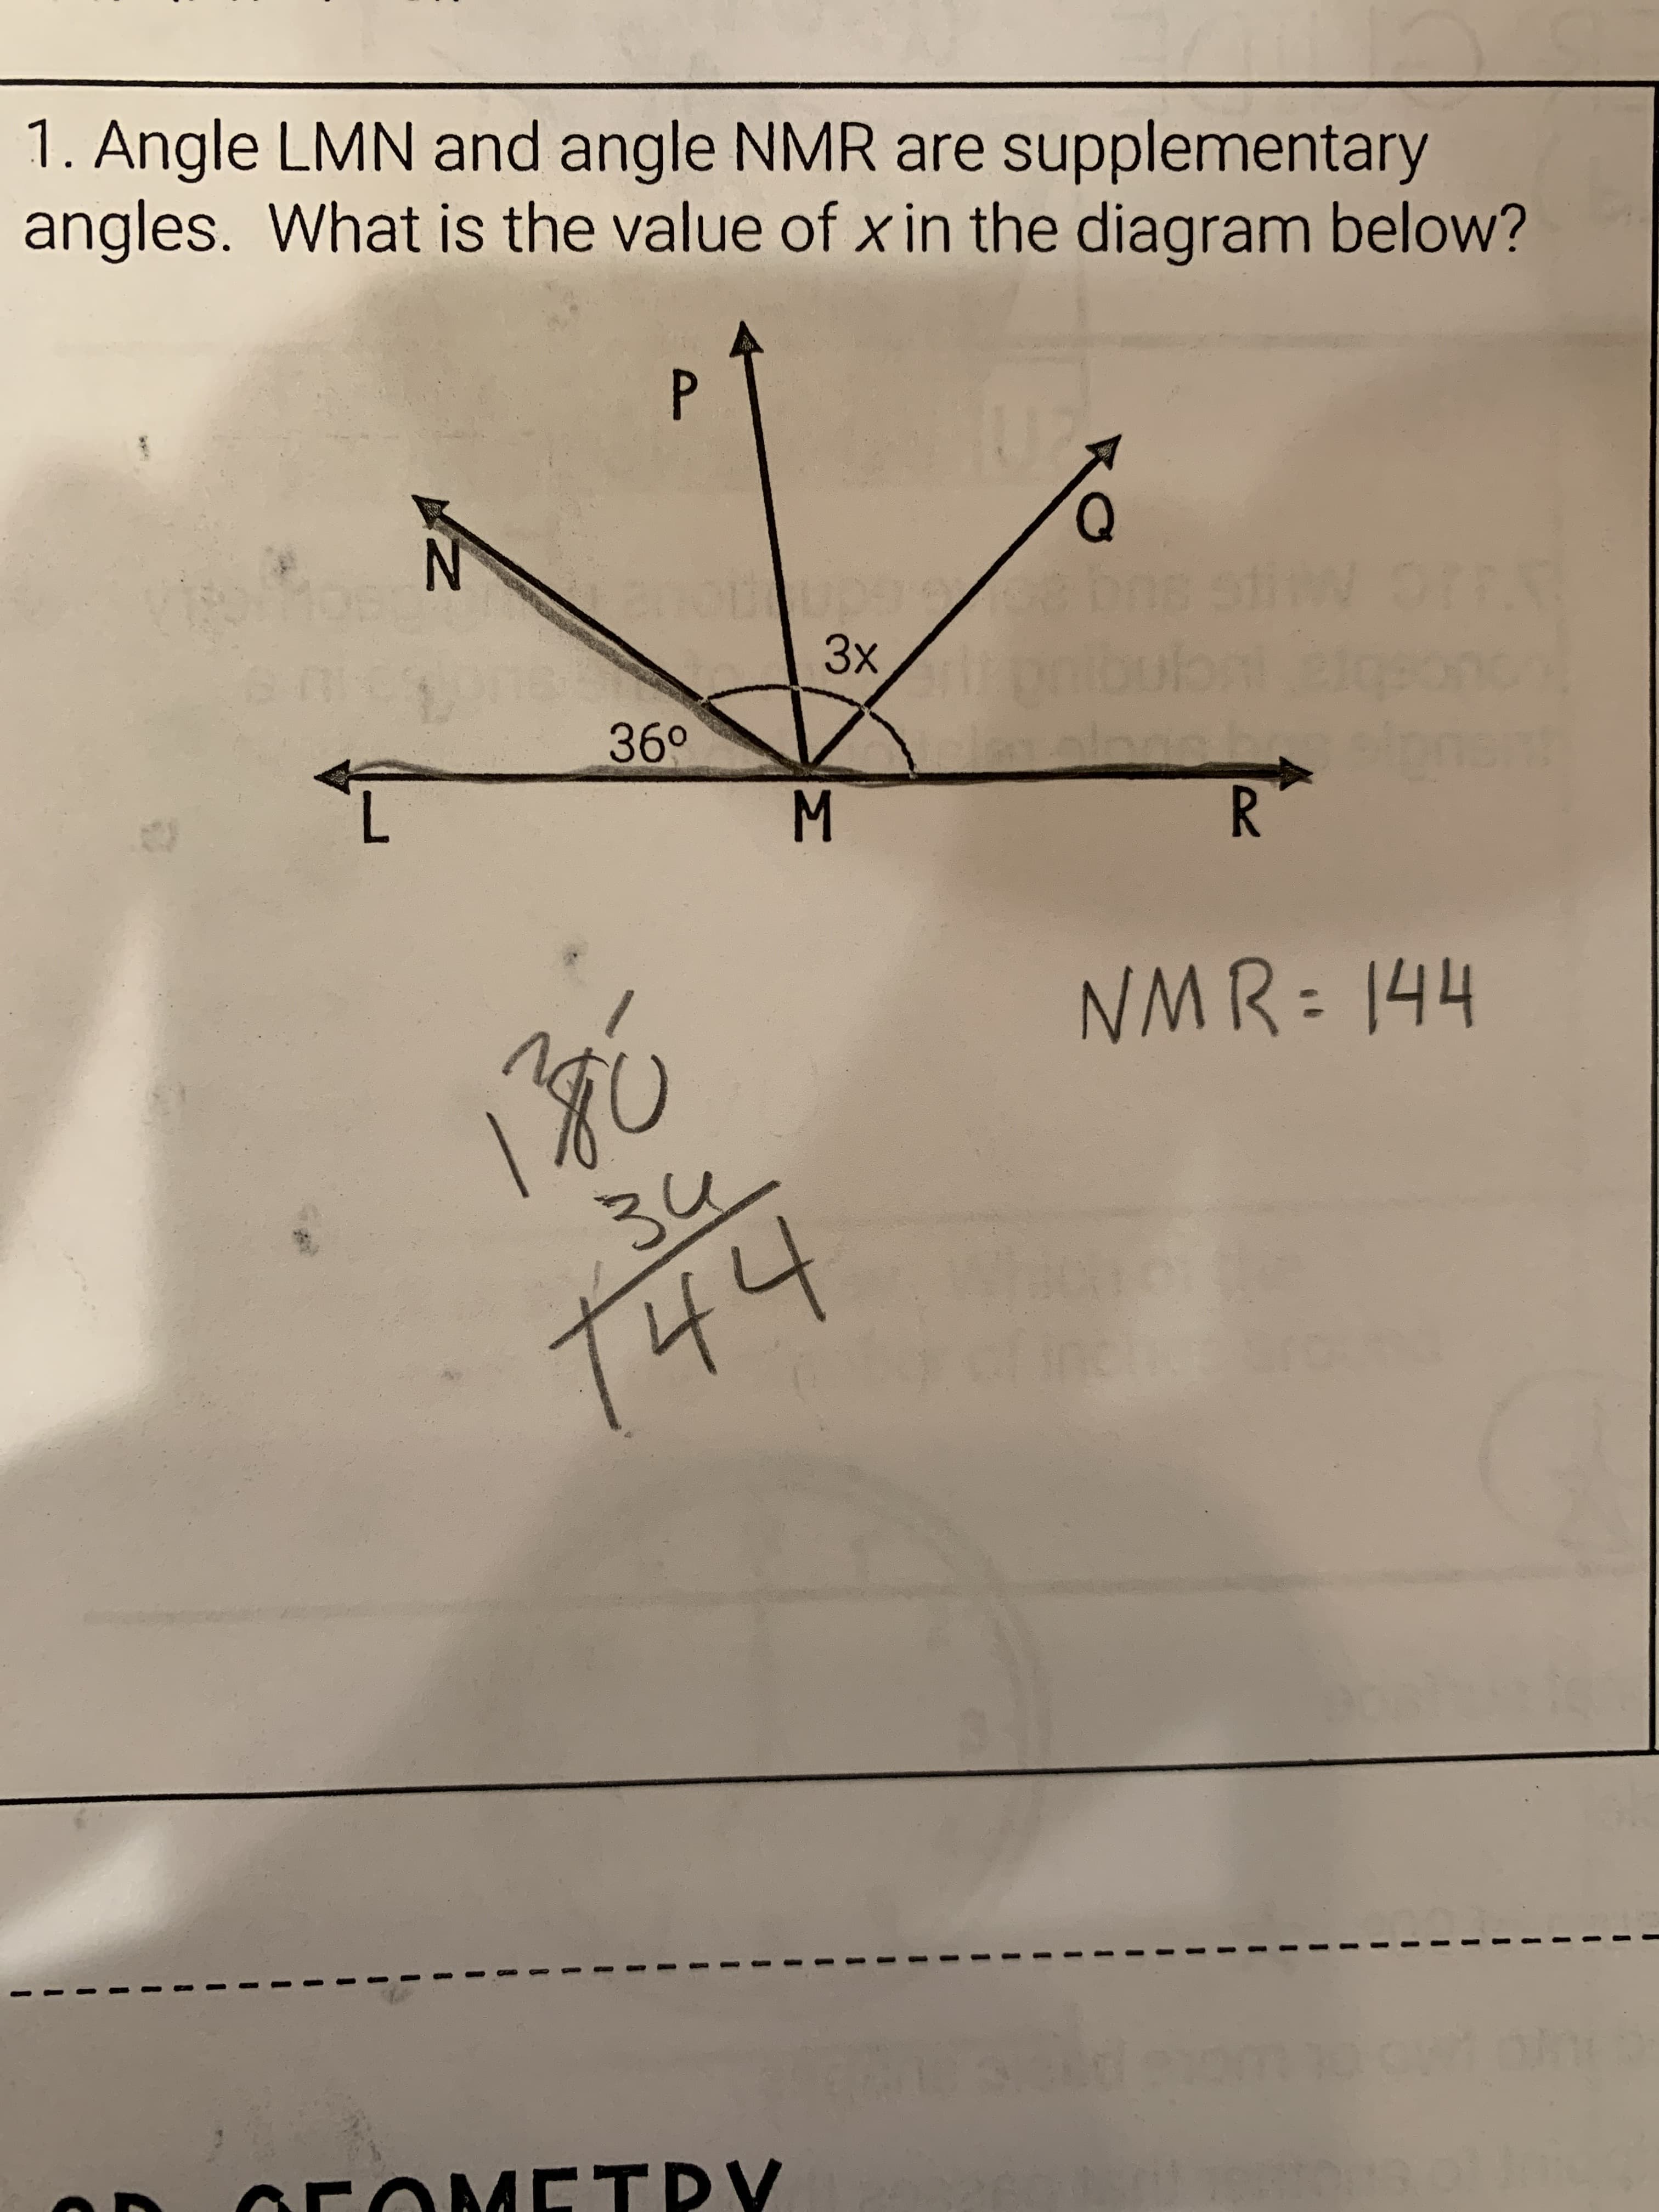 1. Angle LMN and angle NMR are supplementary
angles. What is the value of x in the diagram below?
upee
3x
stiw orr
bra ucng
R.
36°
7.
NMR:144
T44
incih
OEOMETRV
P.
